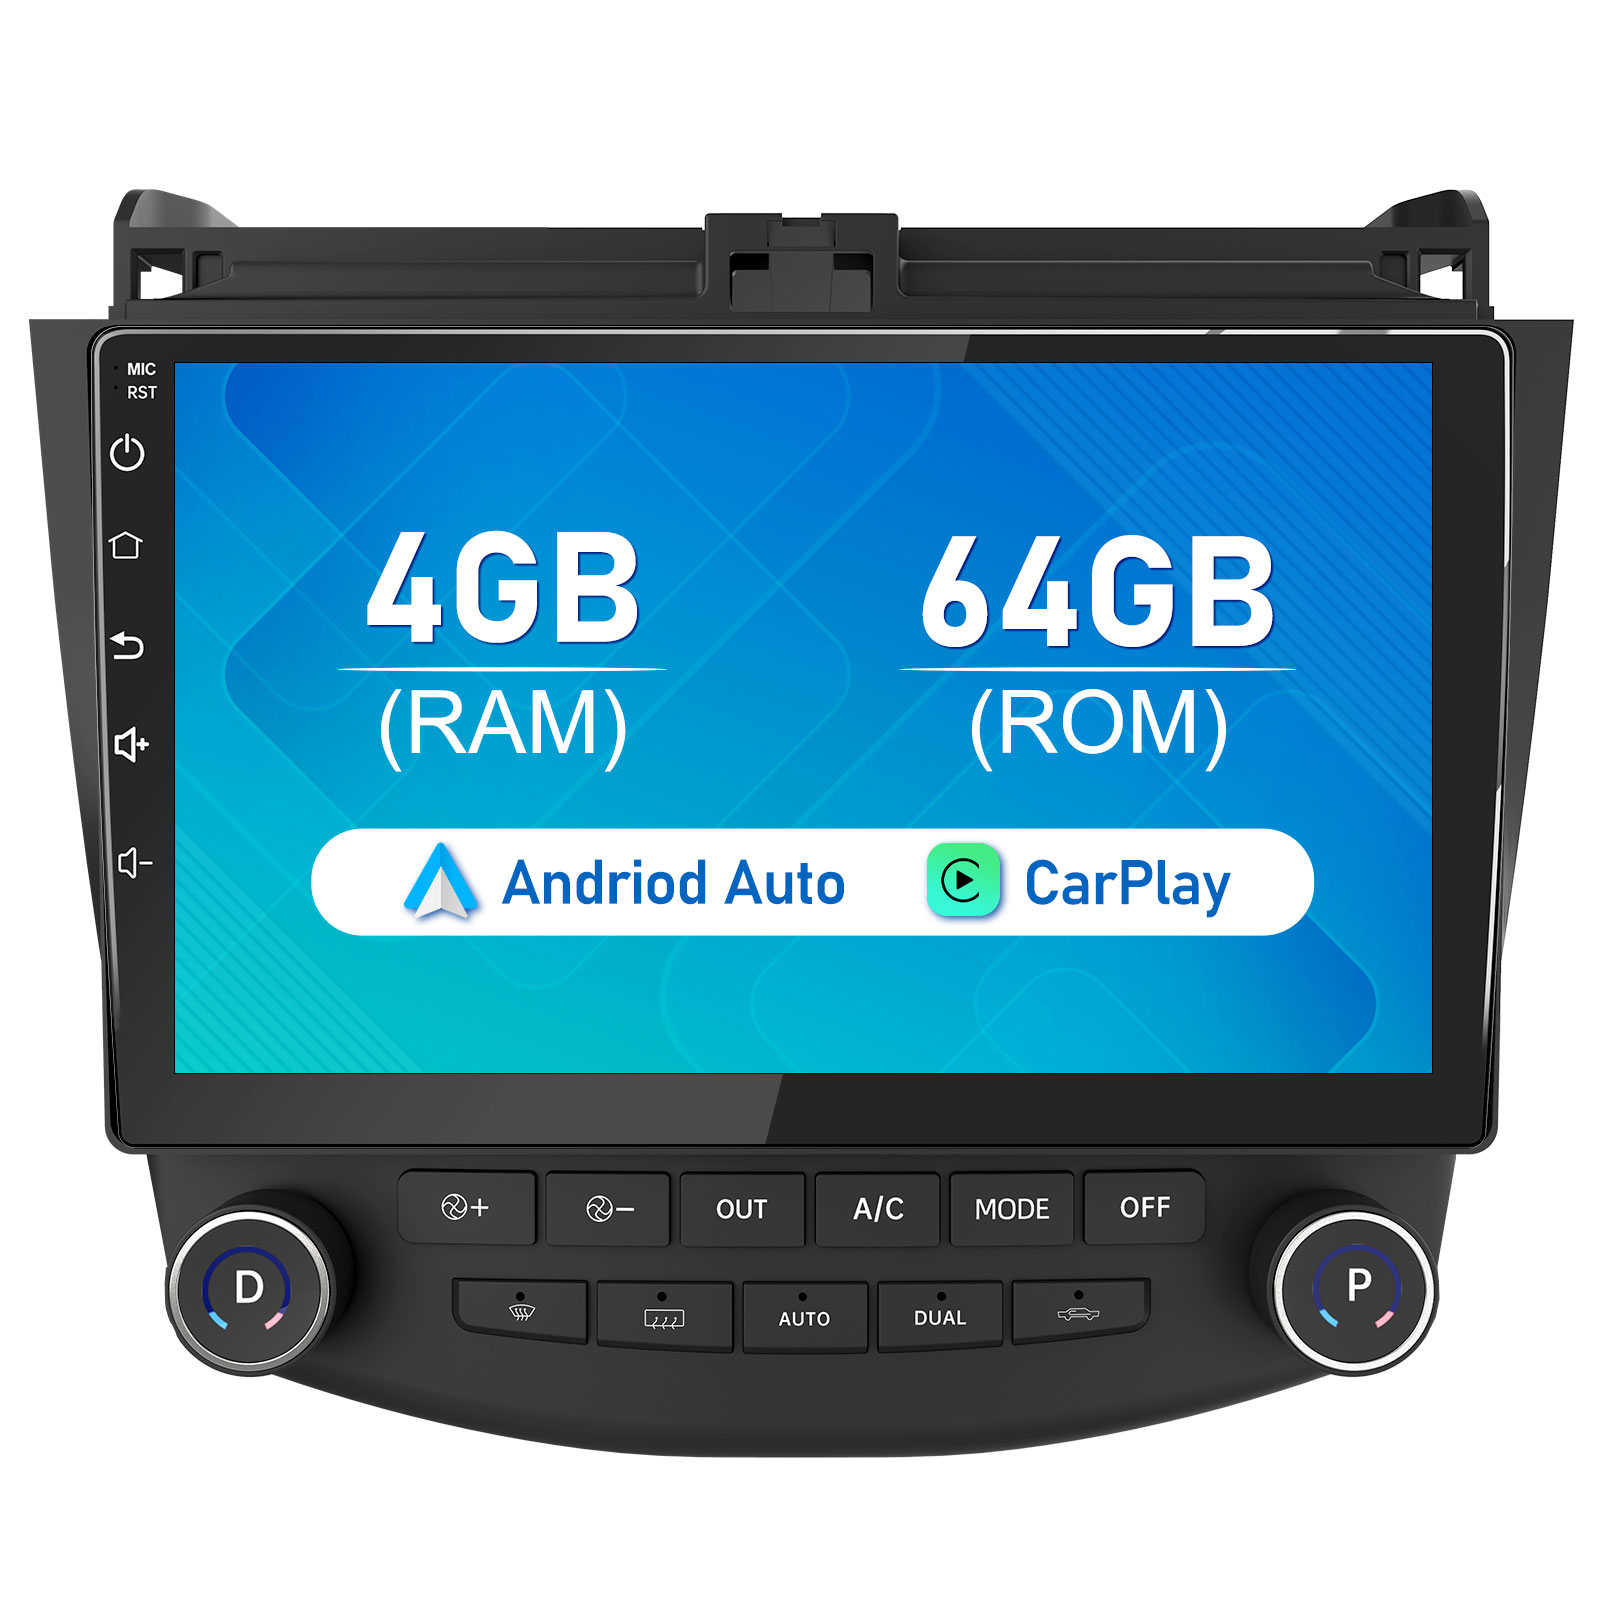 US$ 263.99 AWESAFE Car Radio Stereo 4G Andriod 10 with Built in Carplay  for Honda Accord 7th 2003-2007